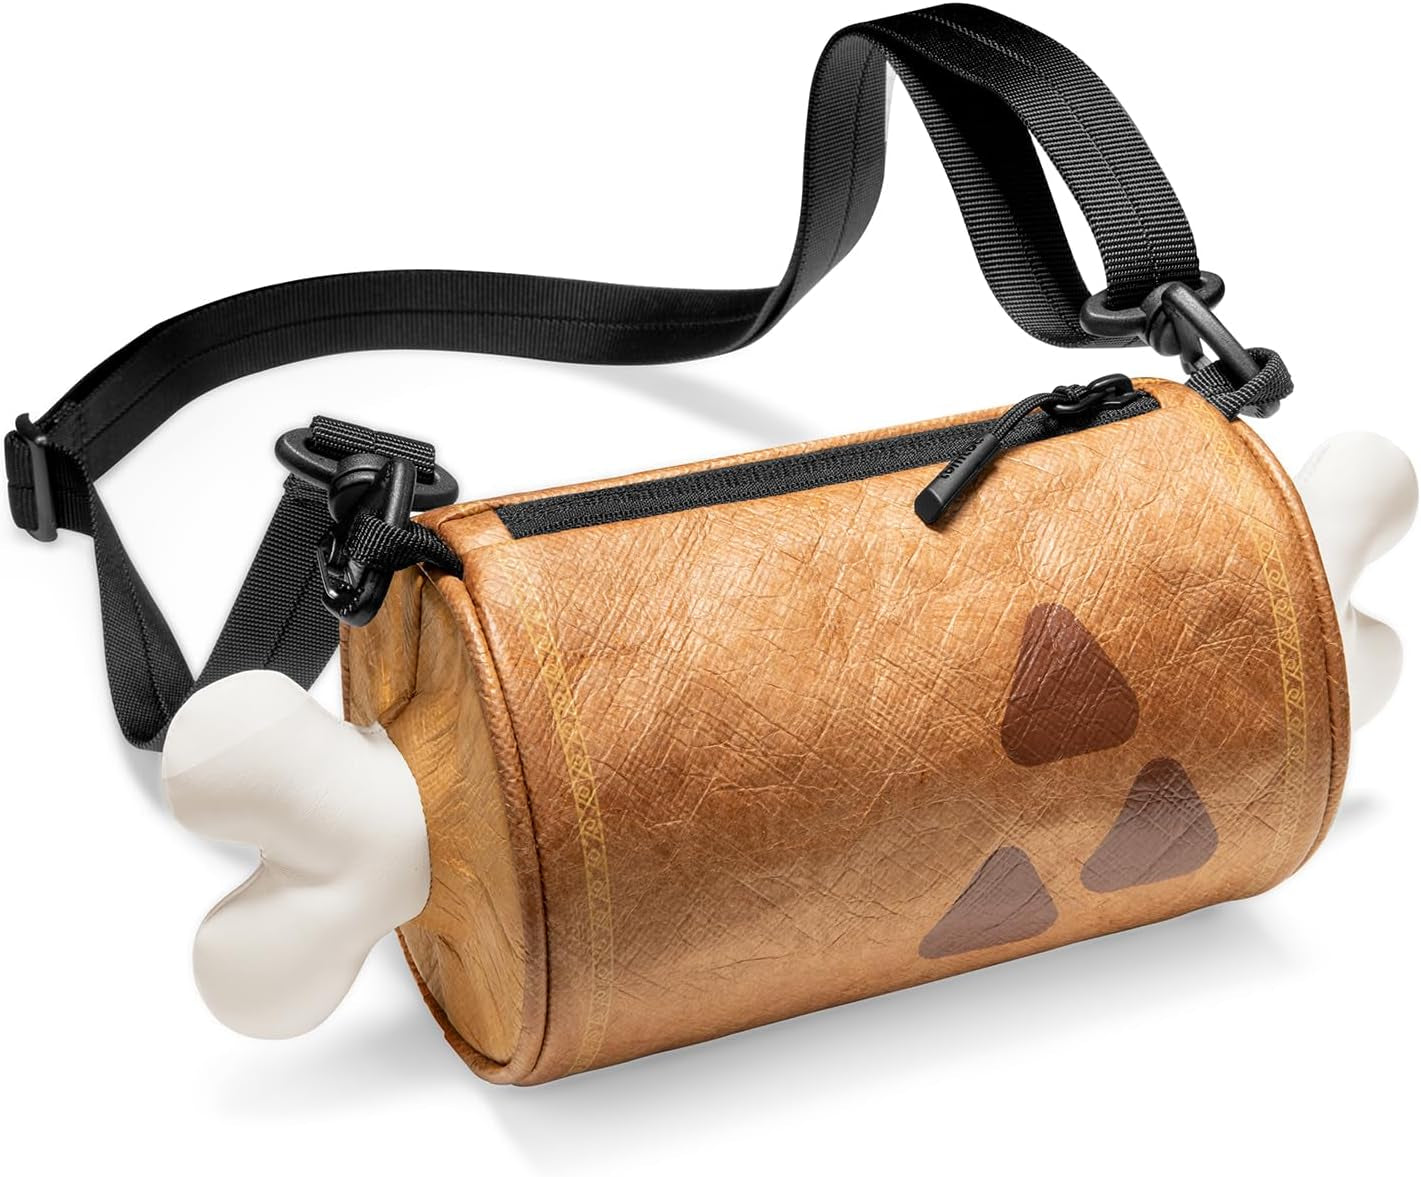 Steak Daily Sling Bag, Monster Hunter Mini Crossbody Bag, Eco-Friendly Dupont Material, Great for Holding Mobile Phones, Cosmetics, Keys, Airpods, Credit Cards, a Must-Have for Hungry Hunters!